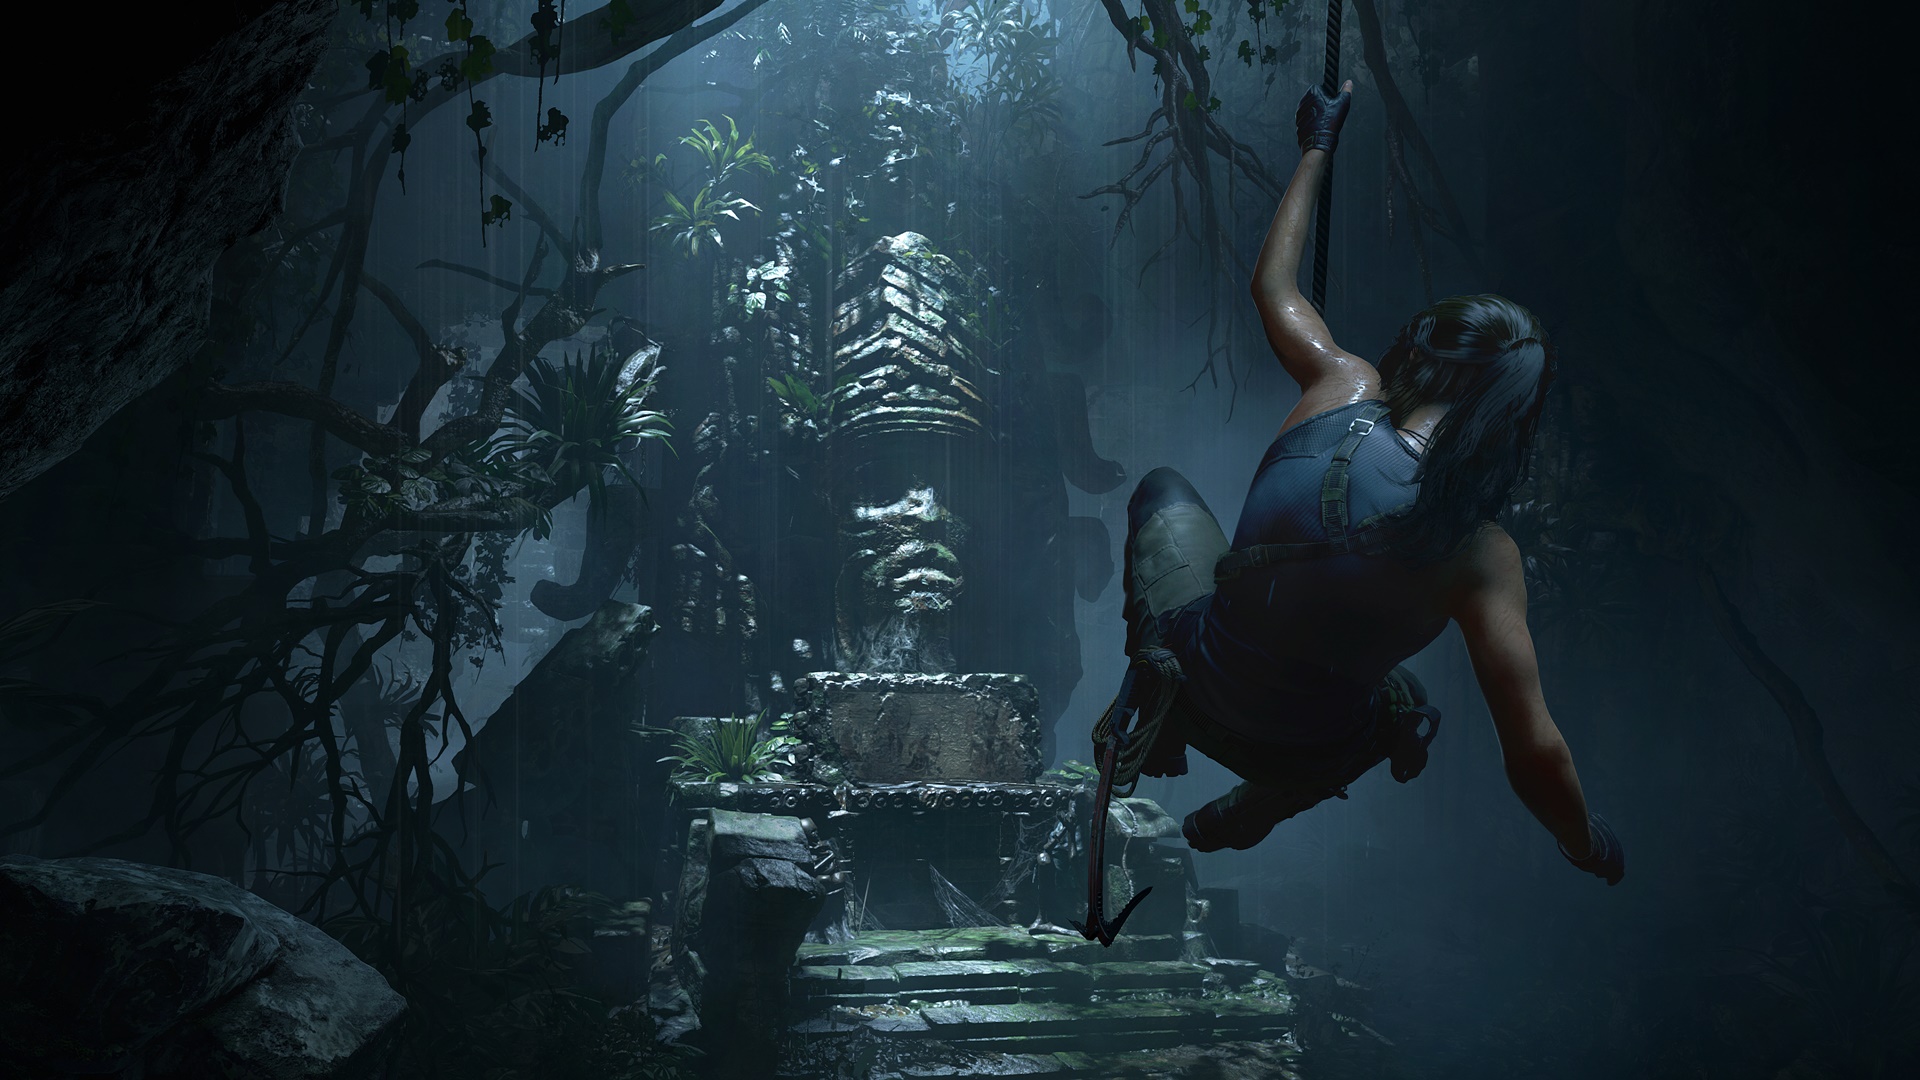 Tomb Raider is getting an animated series on Netflix from